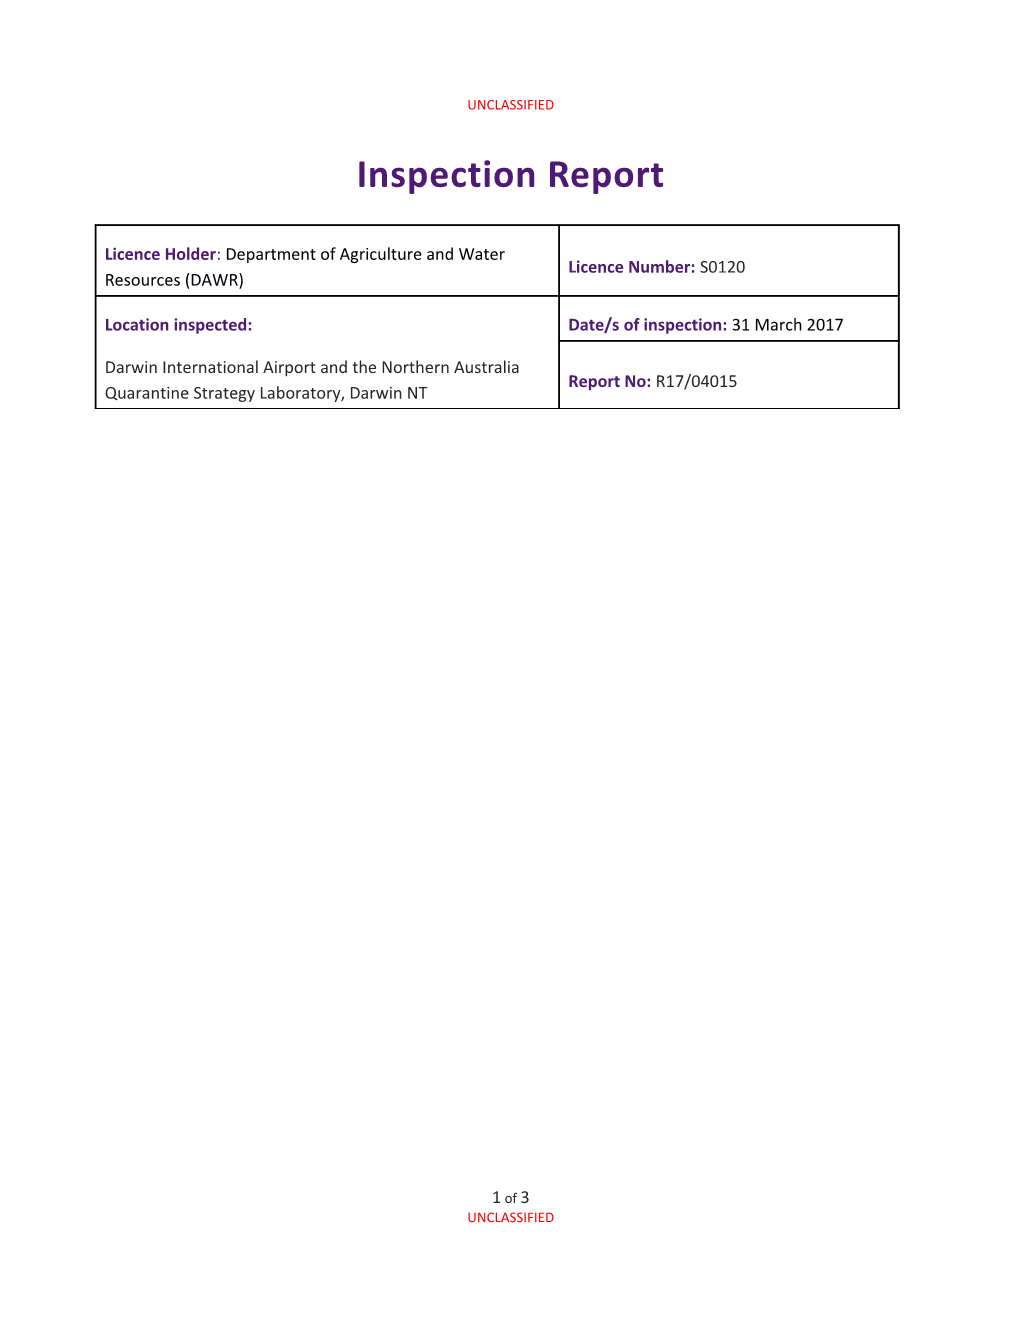 Inspection Report: Department of Agriculture and Water Resources (Darwin Airport and NT